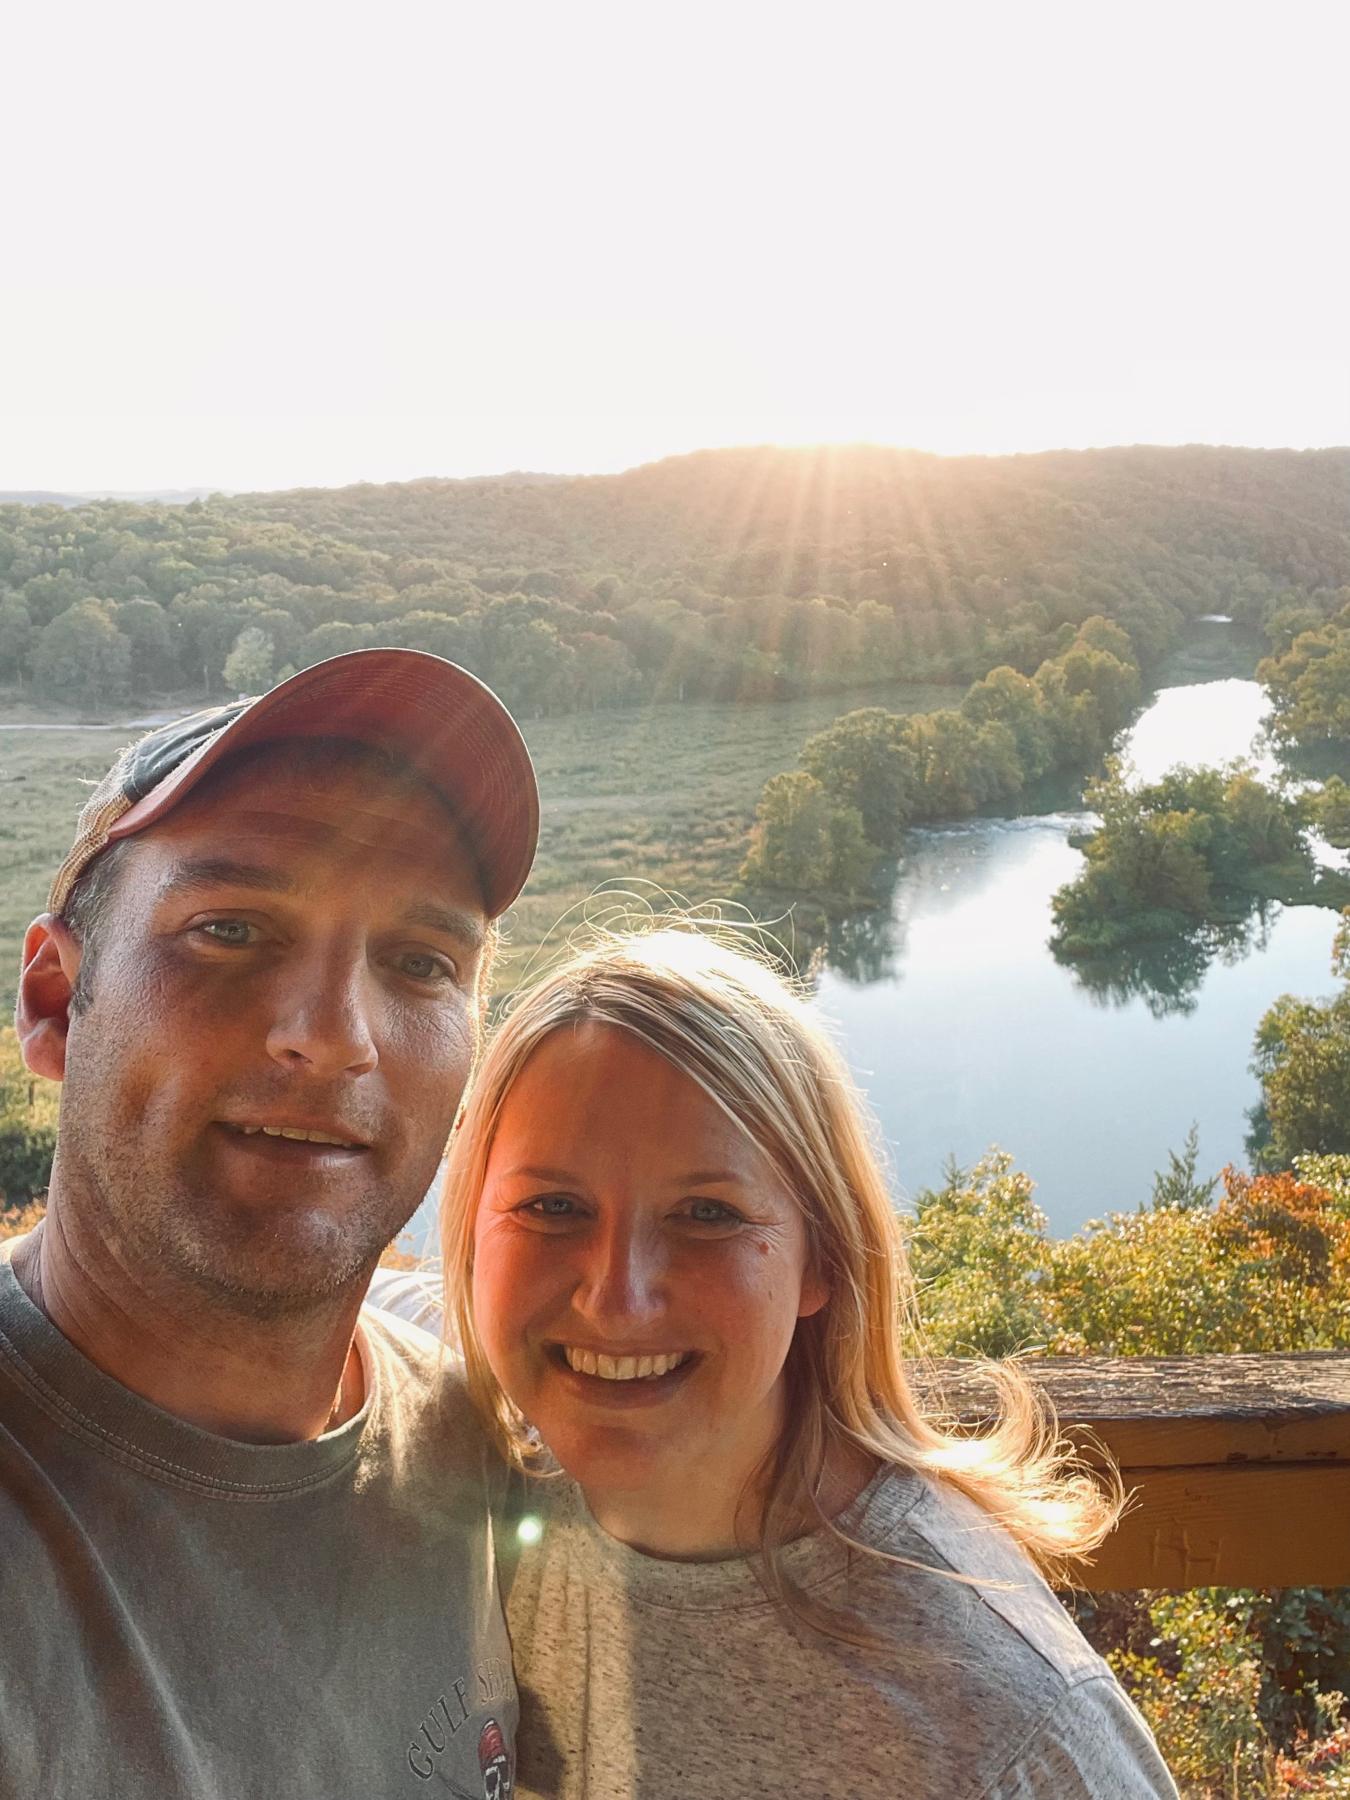 Our first trip to the Ozarks